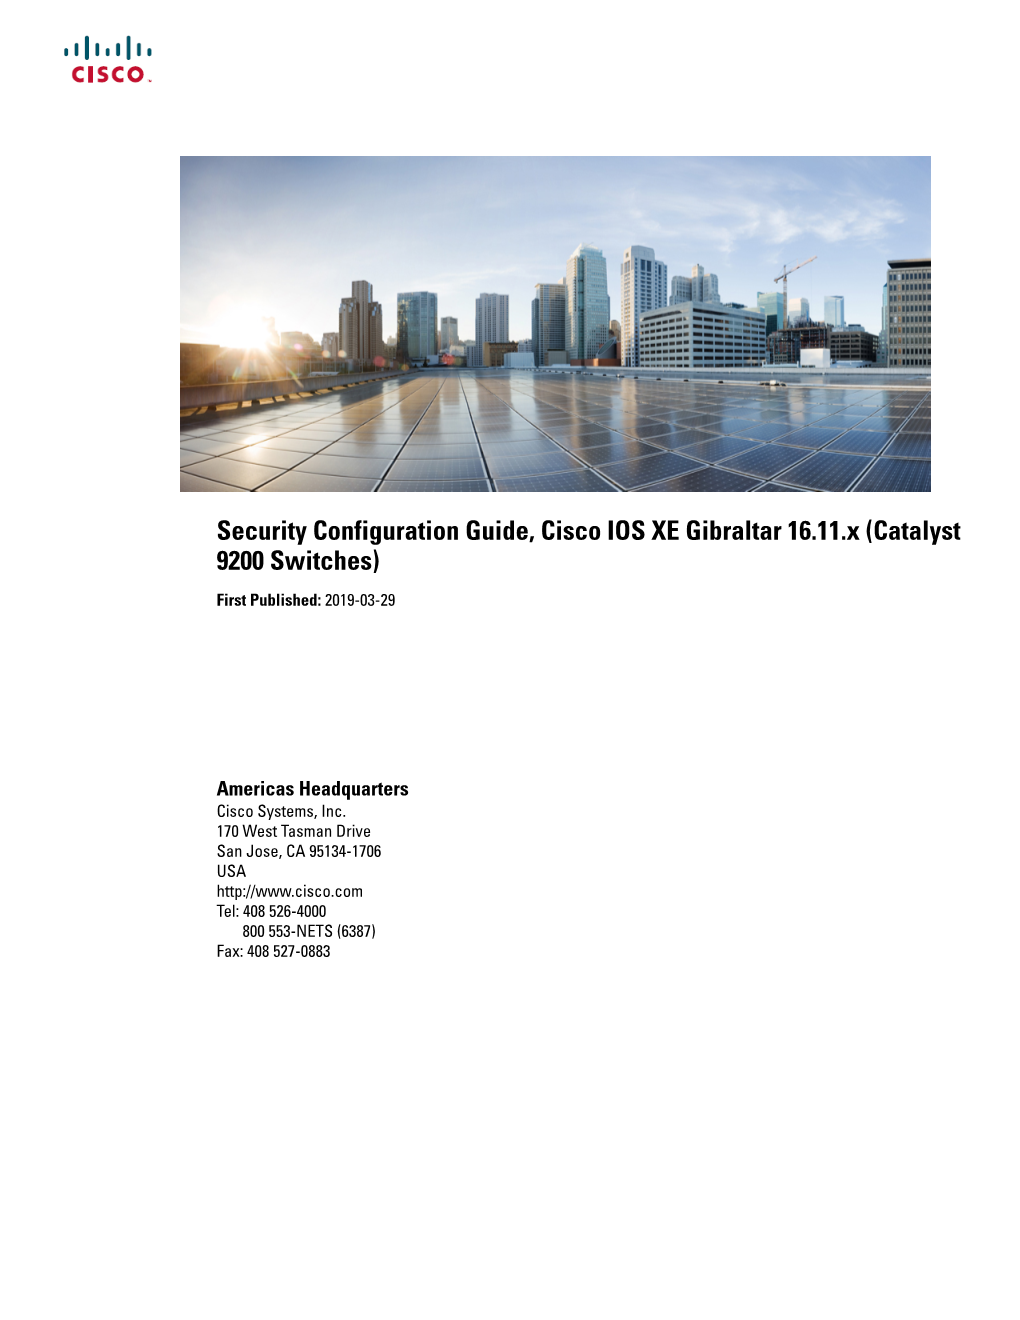 Security Configuration Guide, Cisco IOS XE Gibraltar 16.11.X (Catalyst 9200 Switches)